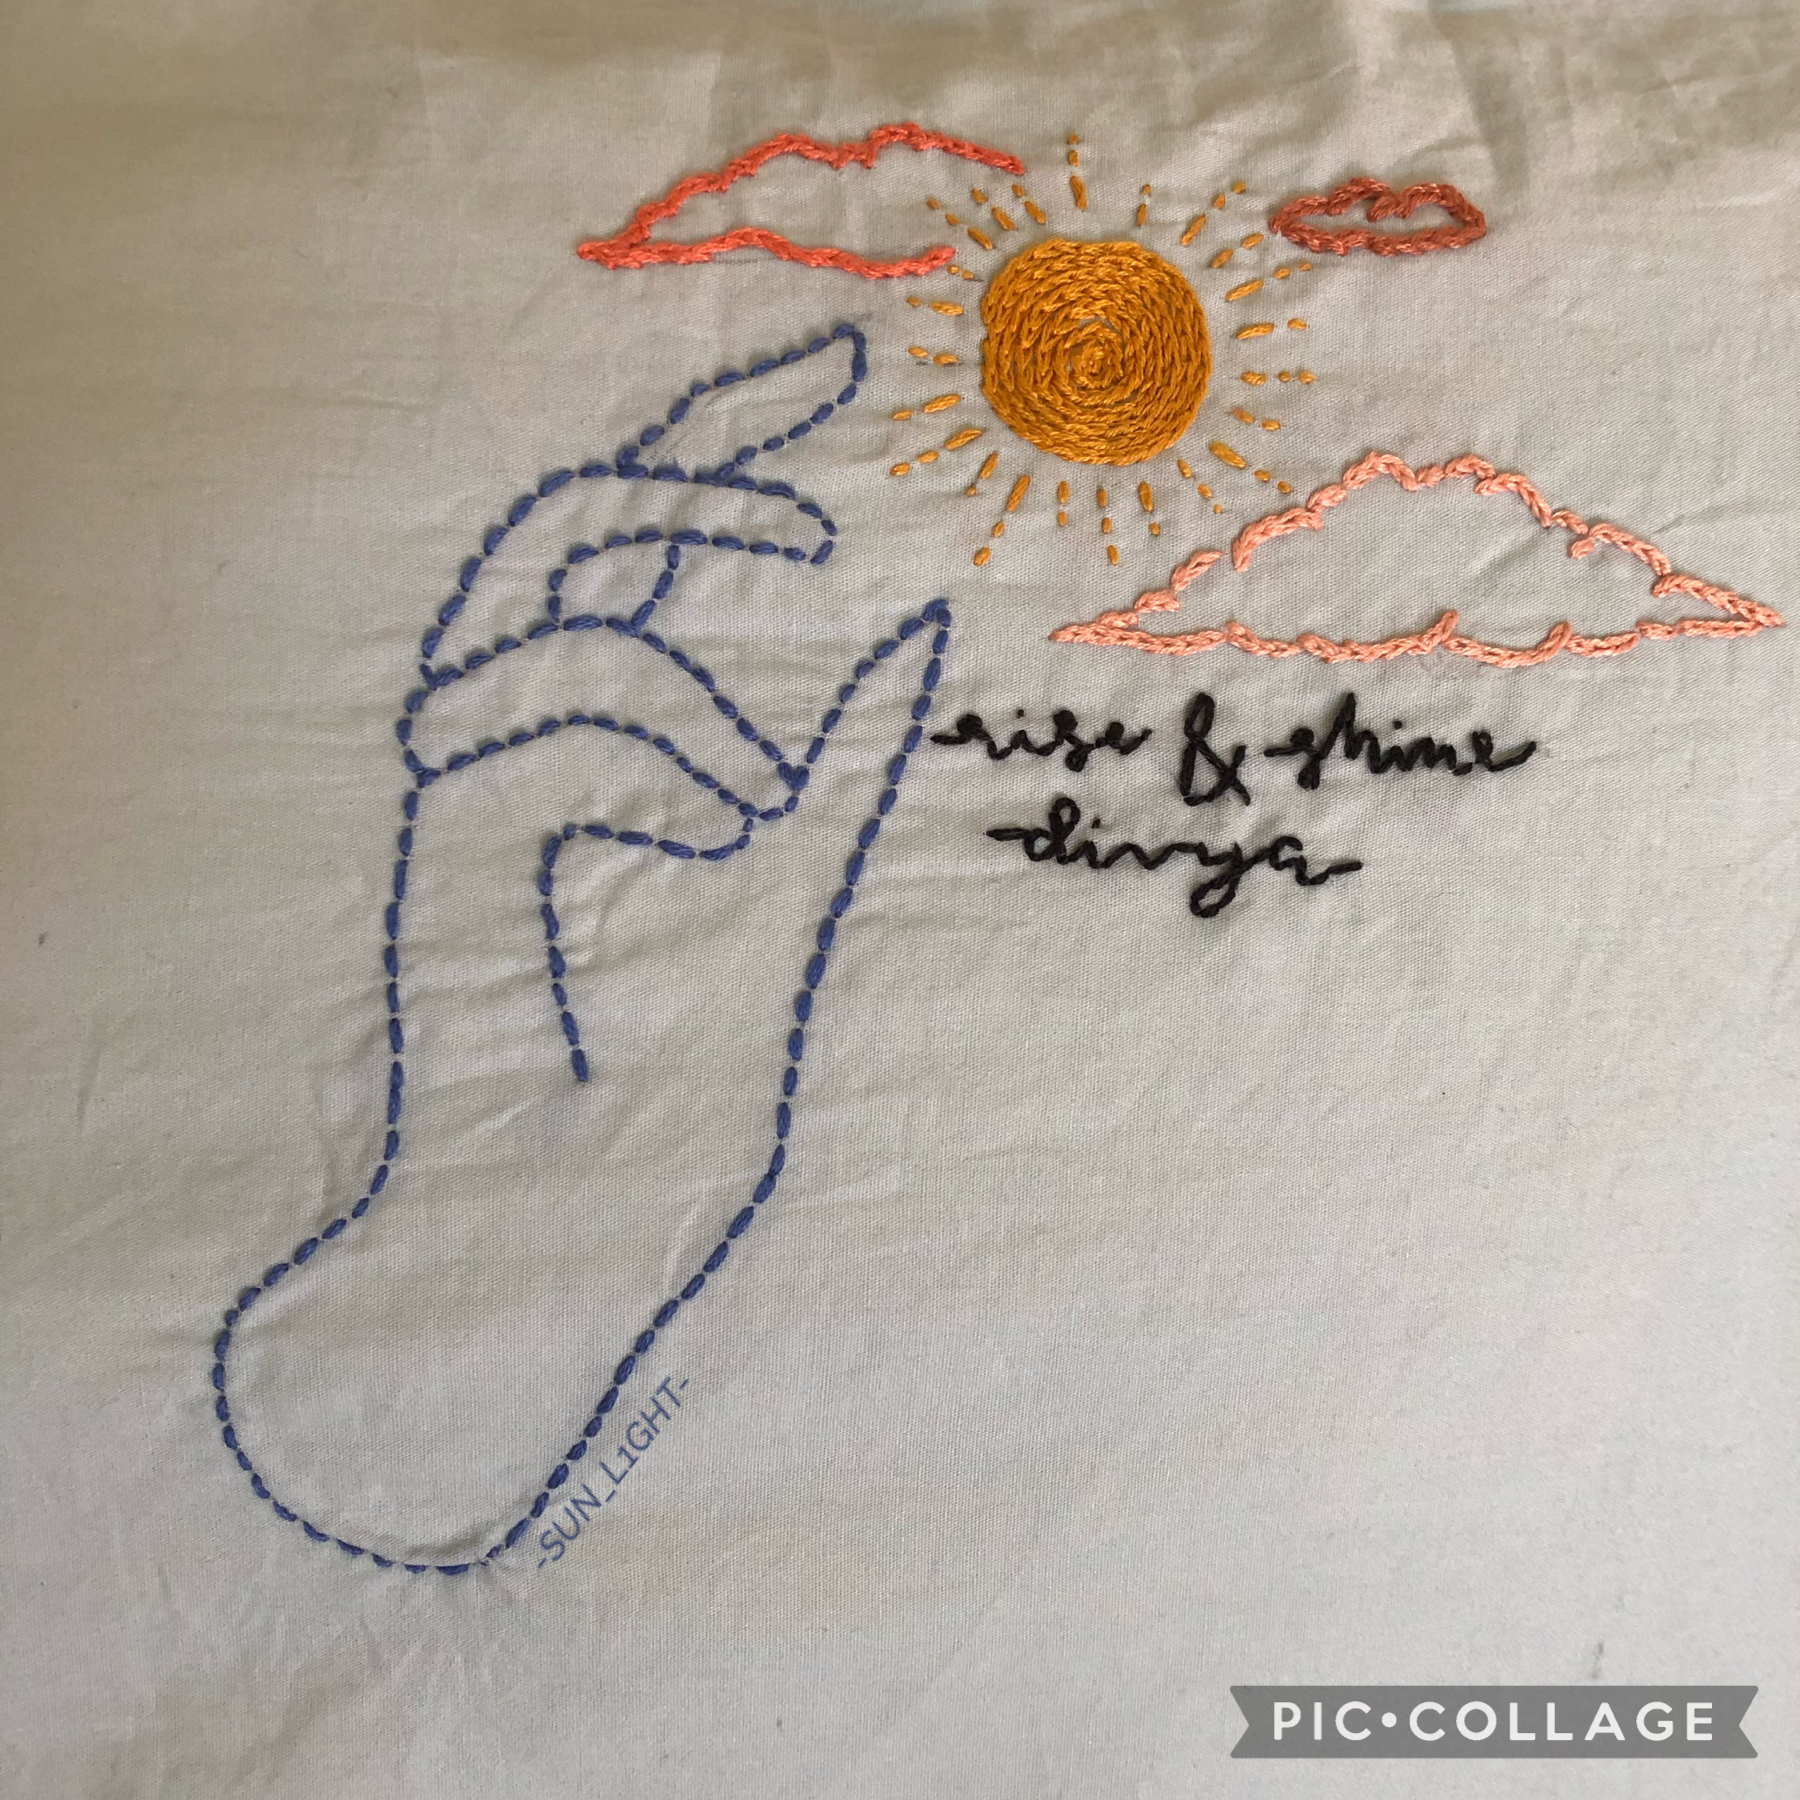 <🌞>embroidery project 1!<🪡> ~>>
embroidered this design on a pillow case for a friend (divya) who’s leaving my school~ 
this was my first big embroidery project! ☁️☀️👌 <23•9•21>
…also a segway into the new theme coming soon!! >>